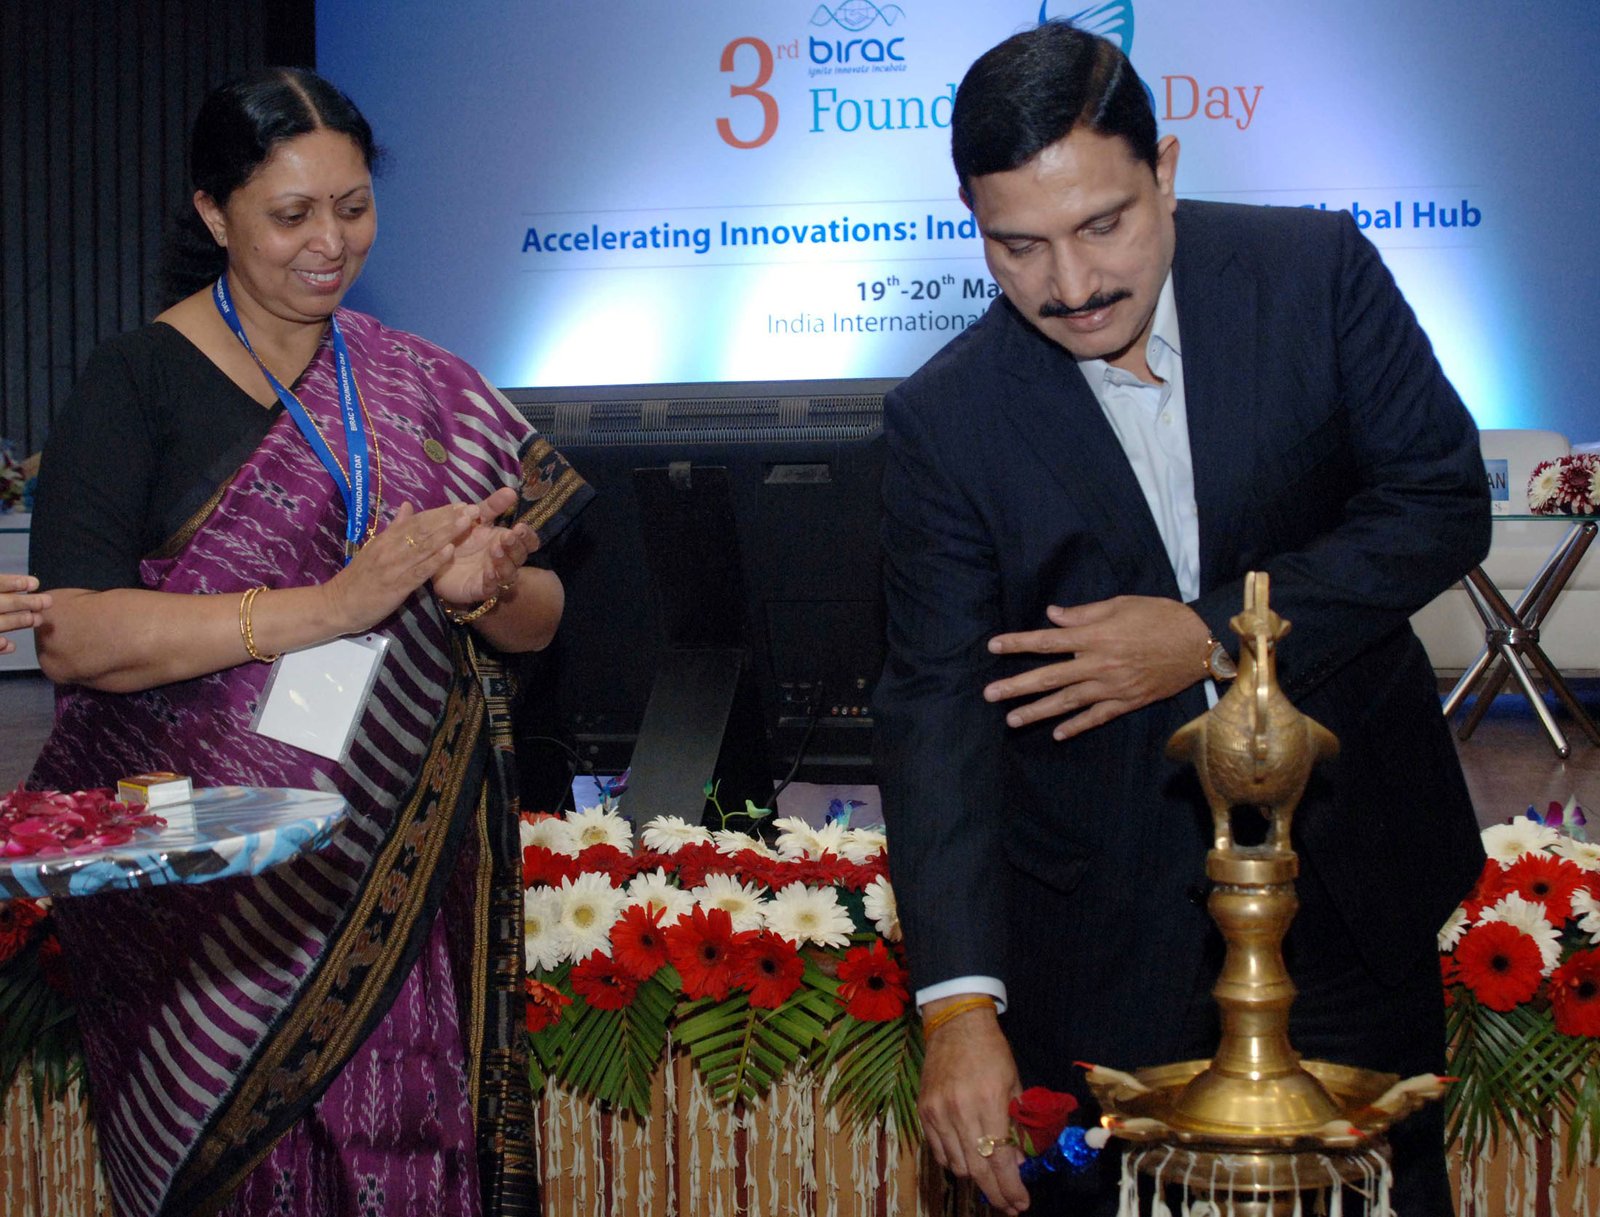 BIRAC's 3rd Foundation Day: The minister of state for S&T, Mr Y S Chowdary lights lamp while Dr Renu Swarup looks on!